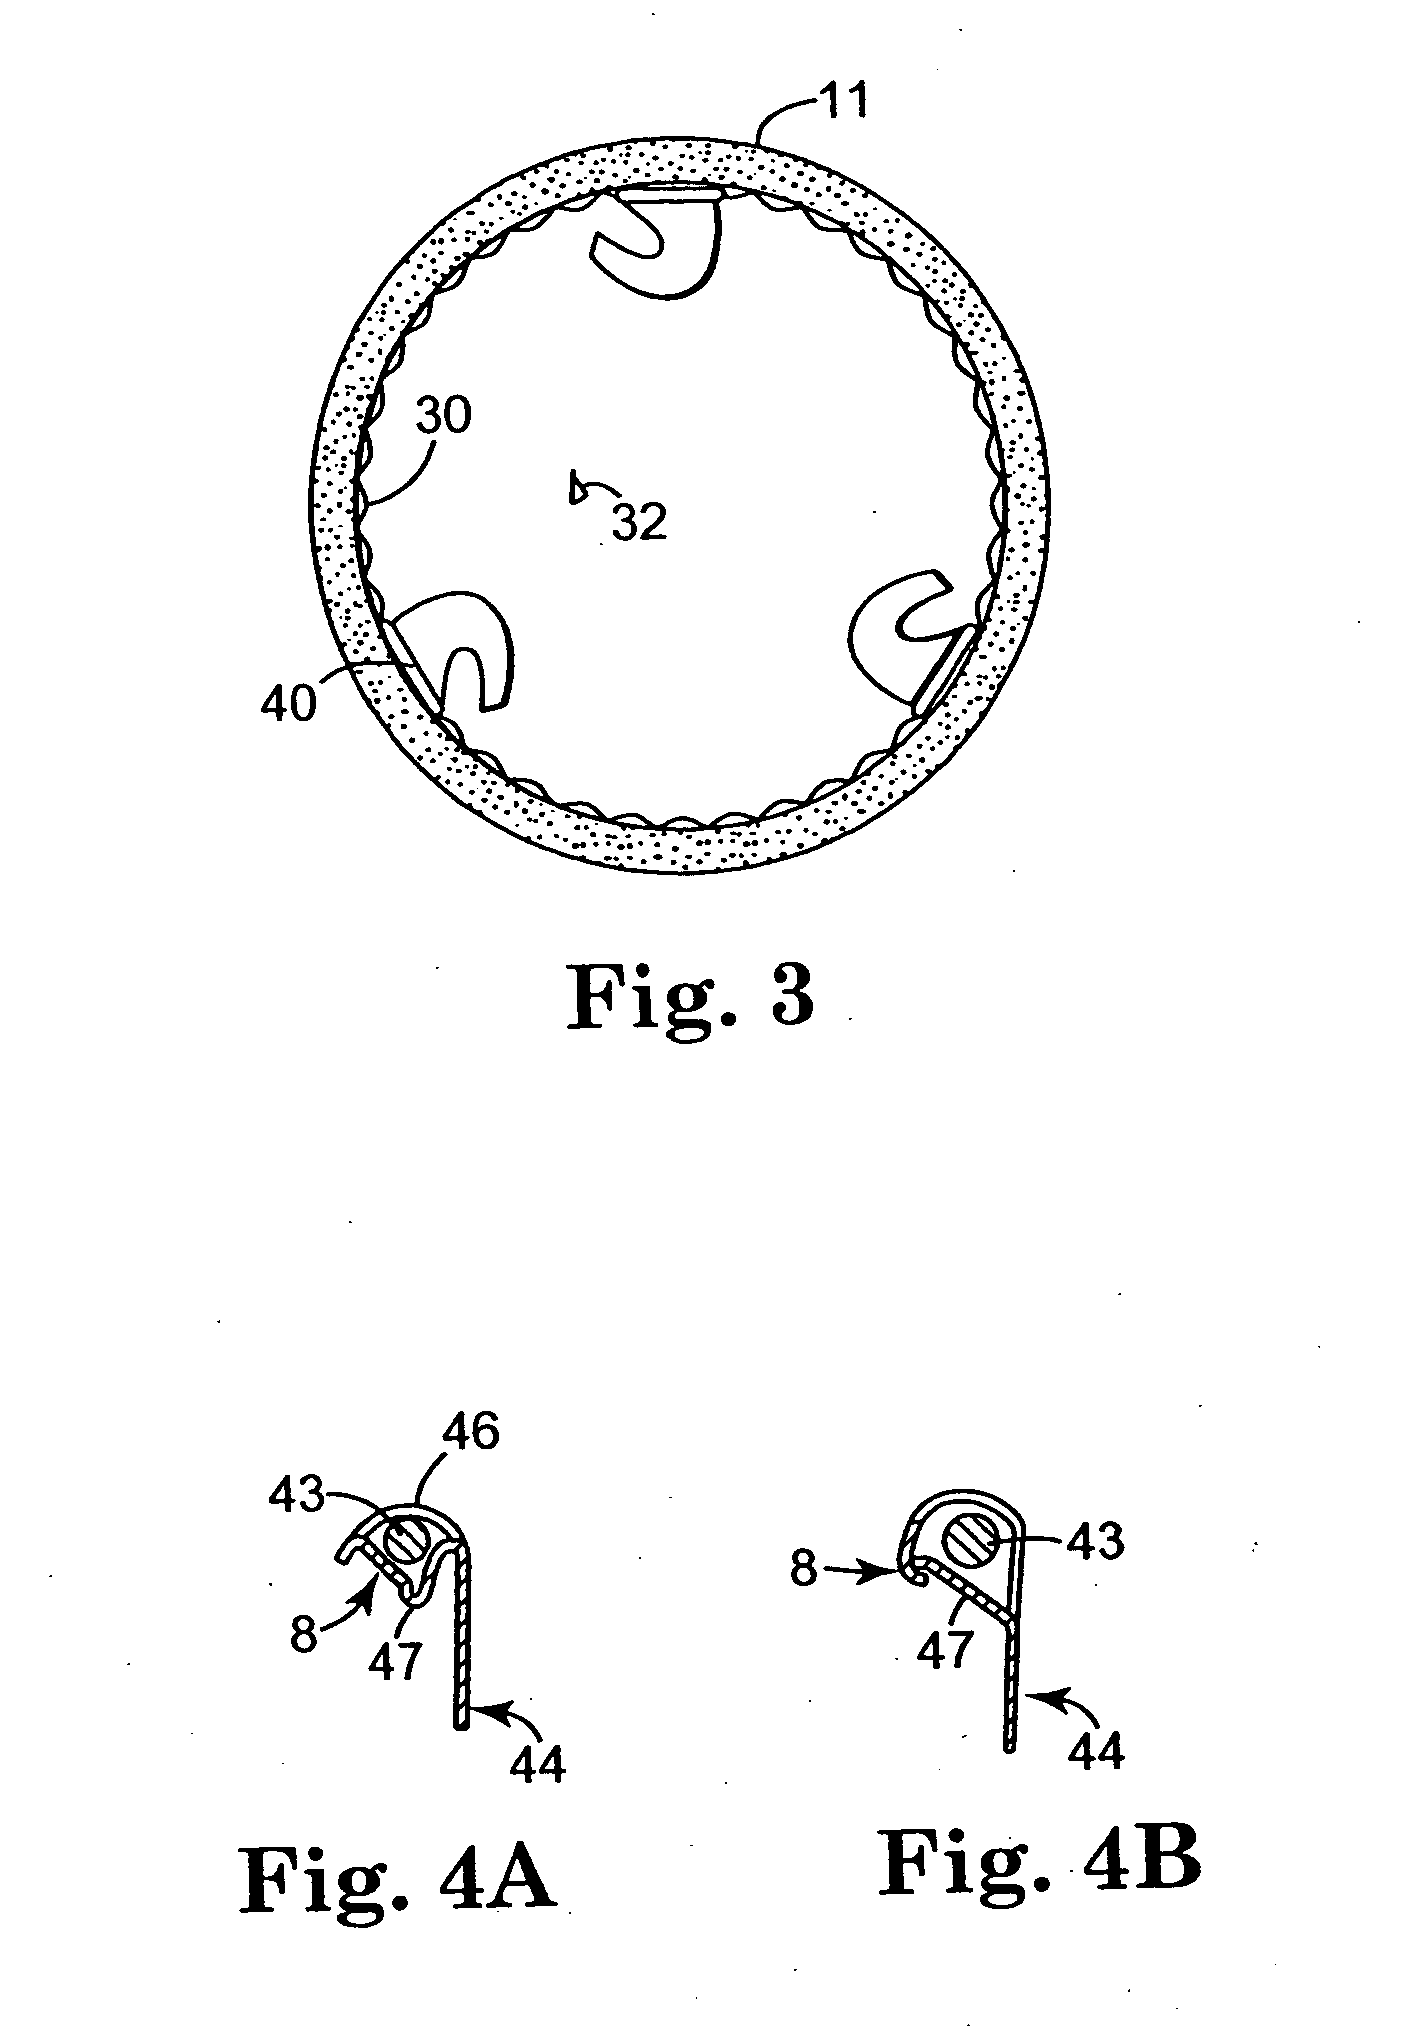 Retrievable stent and method of use thereof